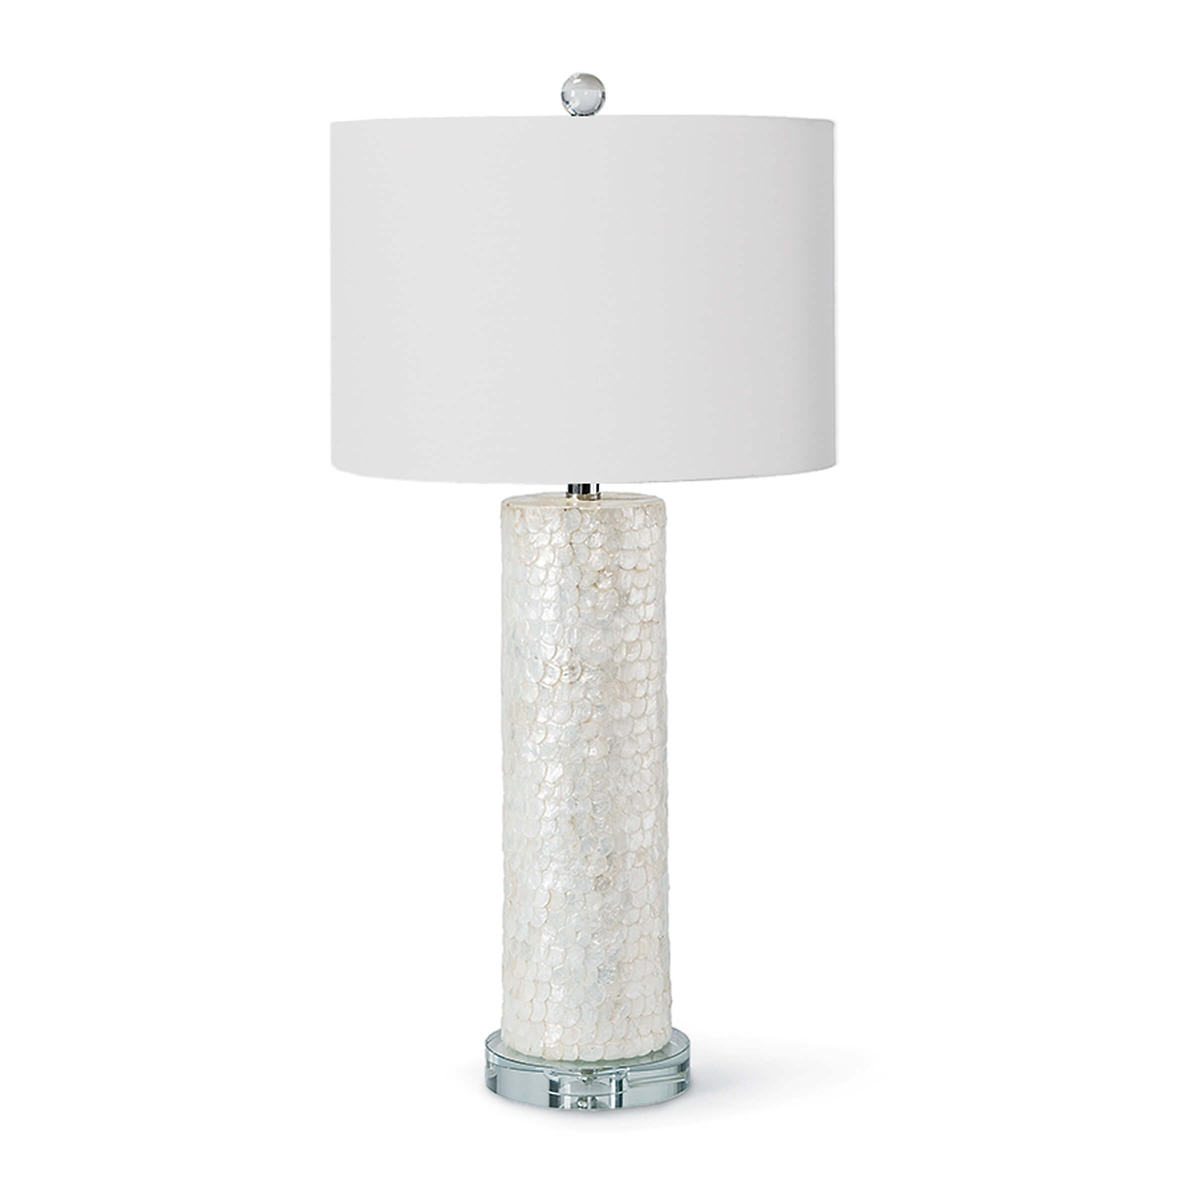 Finley Table Lamp Furniture, White Cylinder Floor Lamp